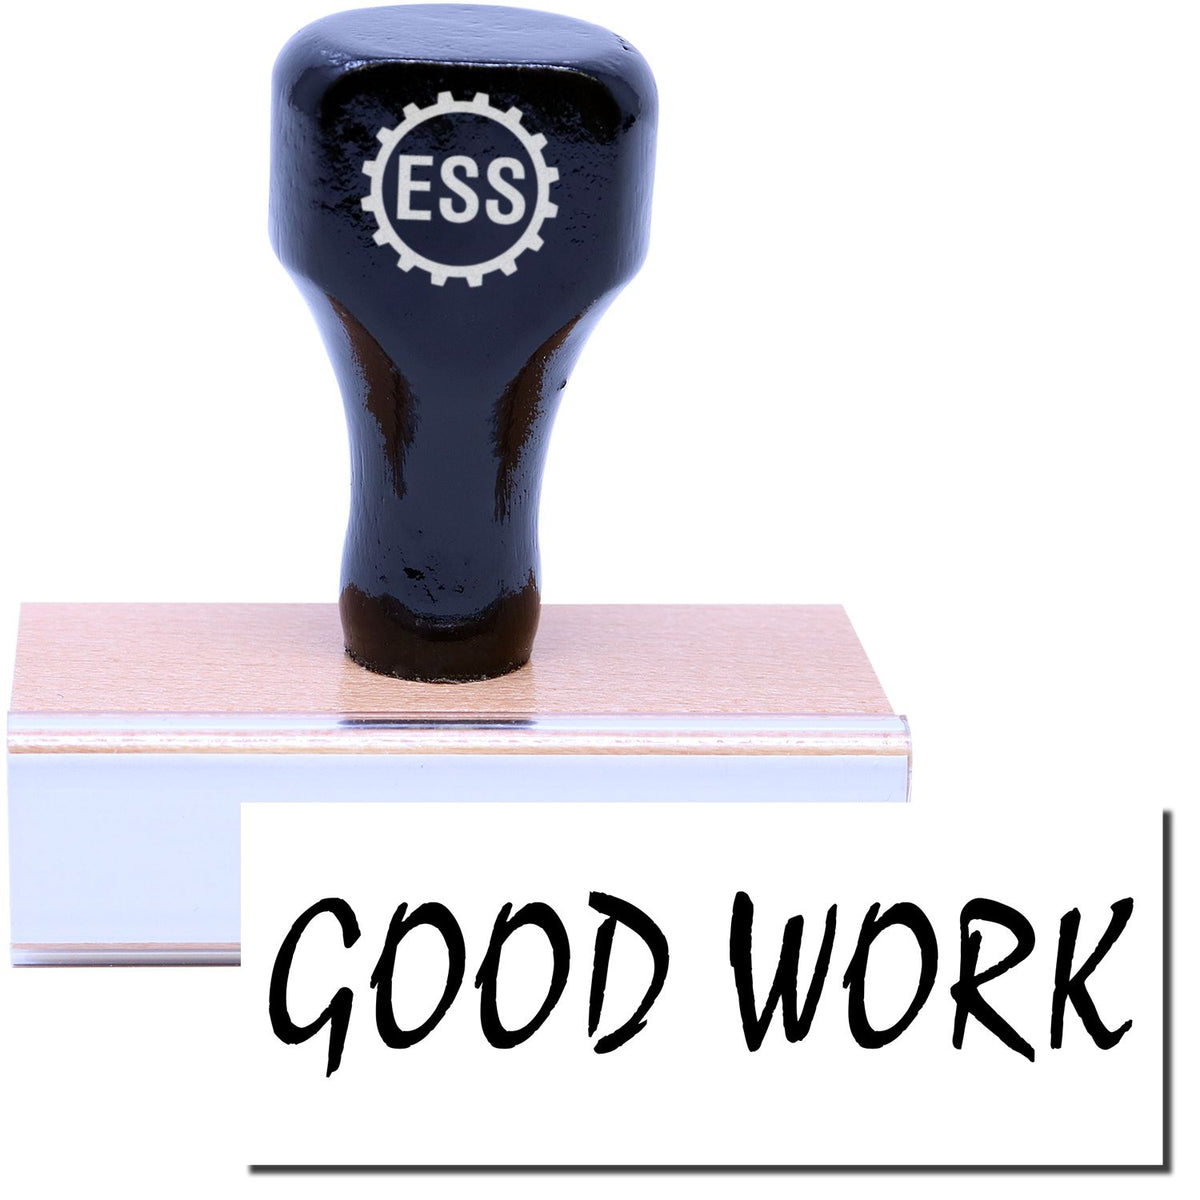 A stock office rubber stamp with a stamped image showing how the text &quot;GOOD WORK&quot; in a large font is displayed after stamping.